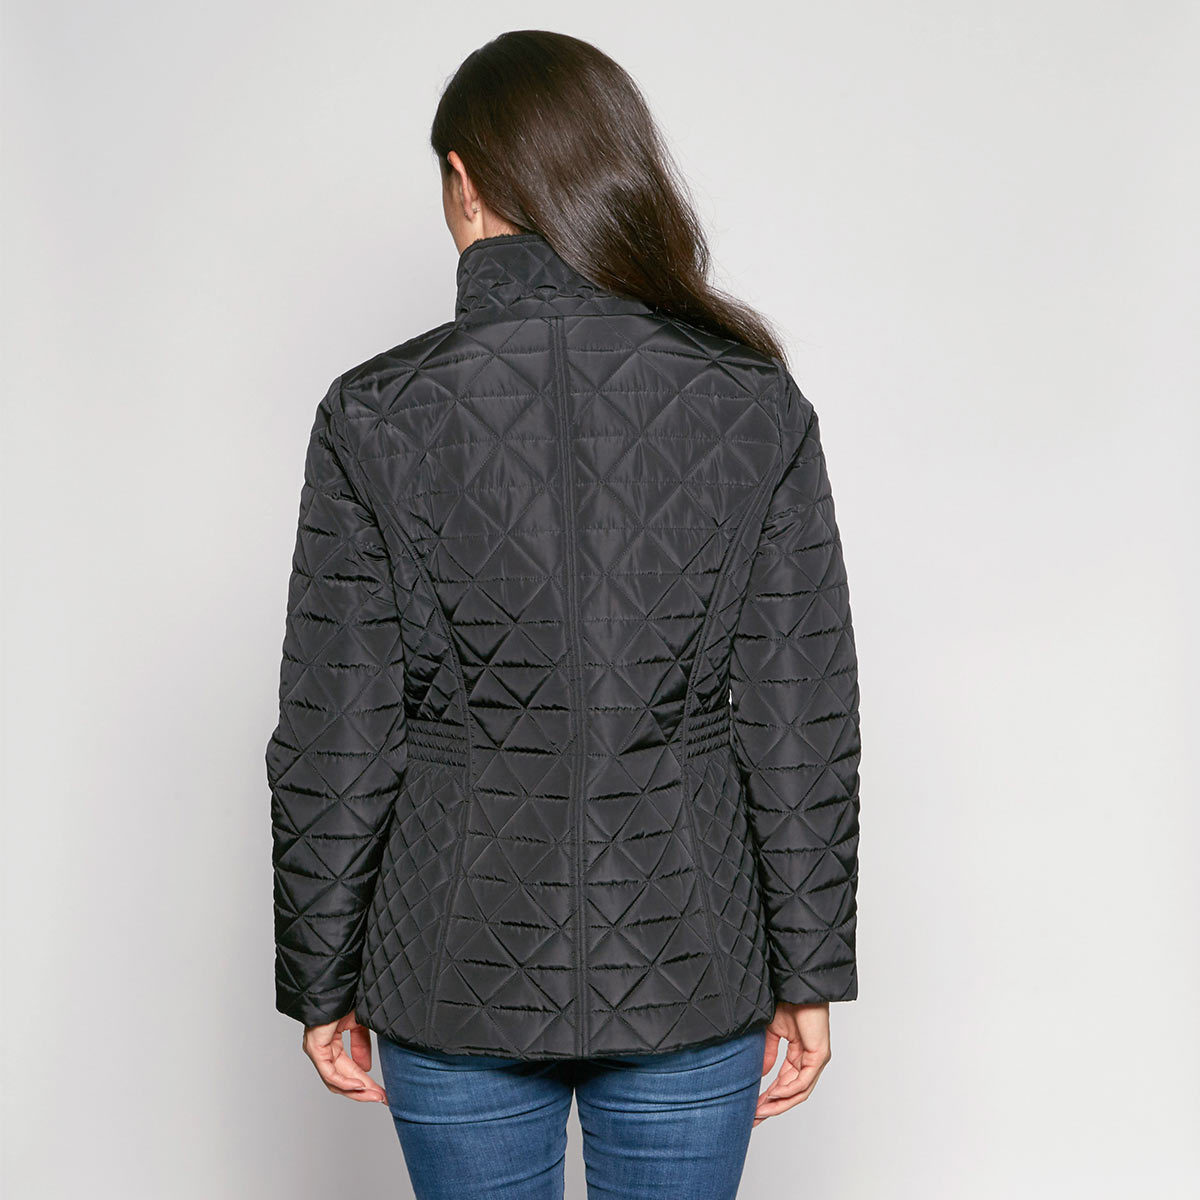 David Barry Women's Diamond Stitched Jacket Available in Black